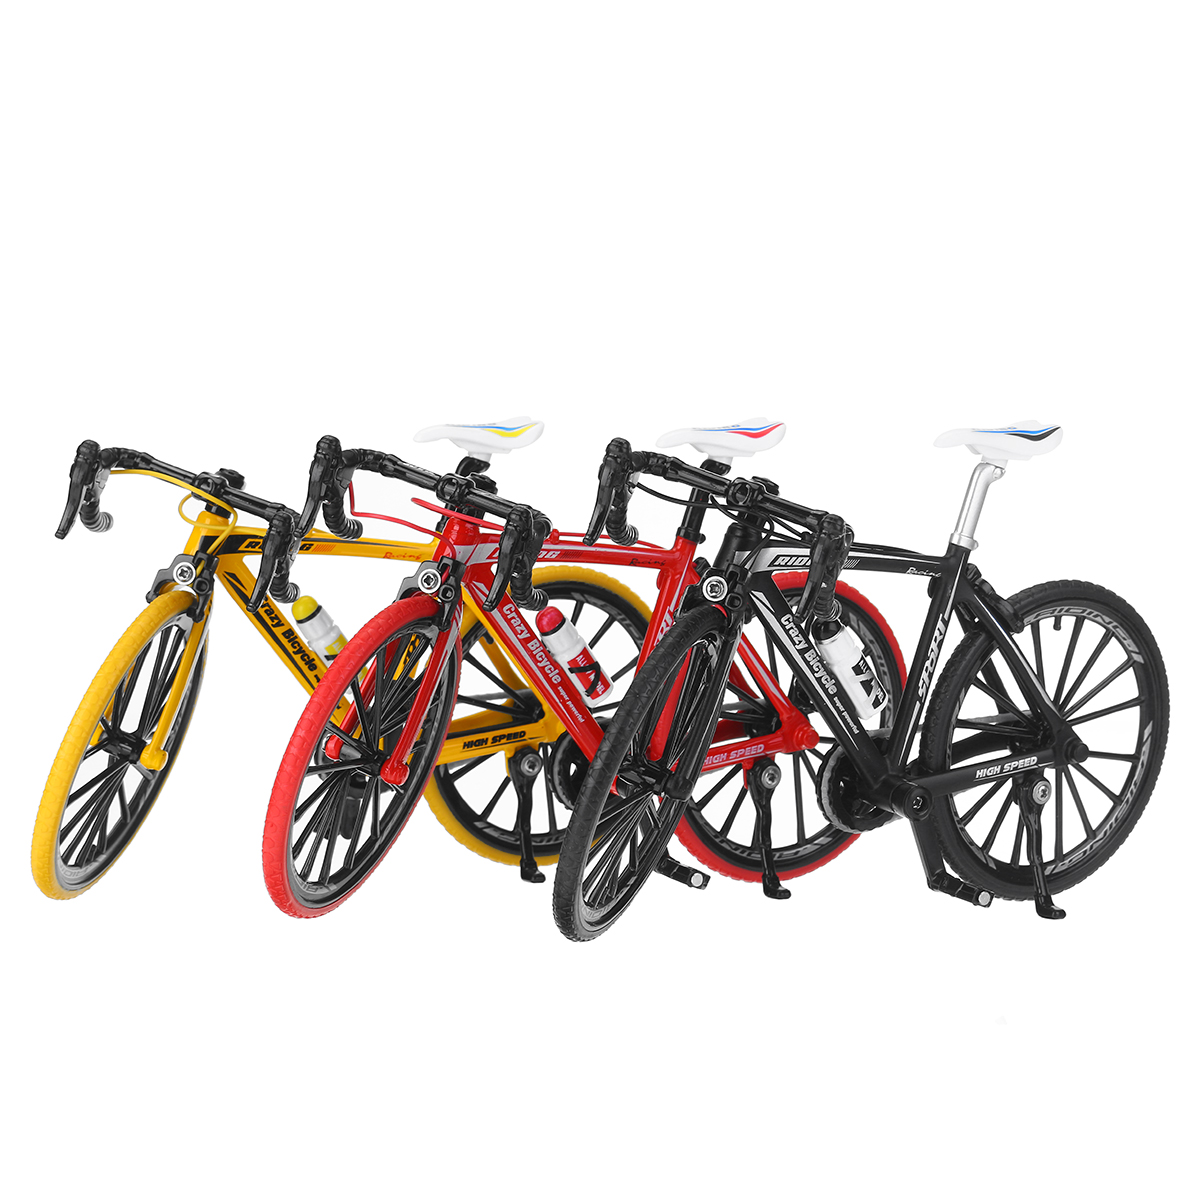 110-3D-Mini-Multi-color-Alloy-Mountain-Racing-Bicycle-Rotatable-Wheel-Diecast-Model-Toy-for-Decorati-1704789-4